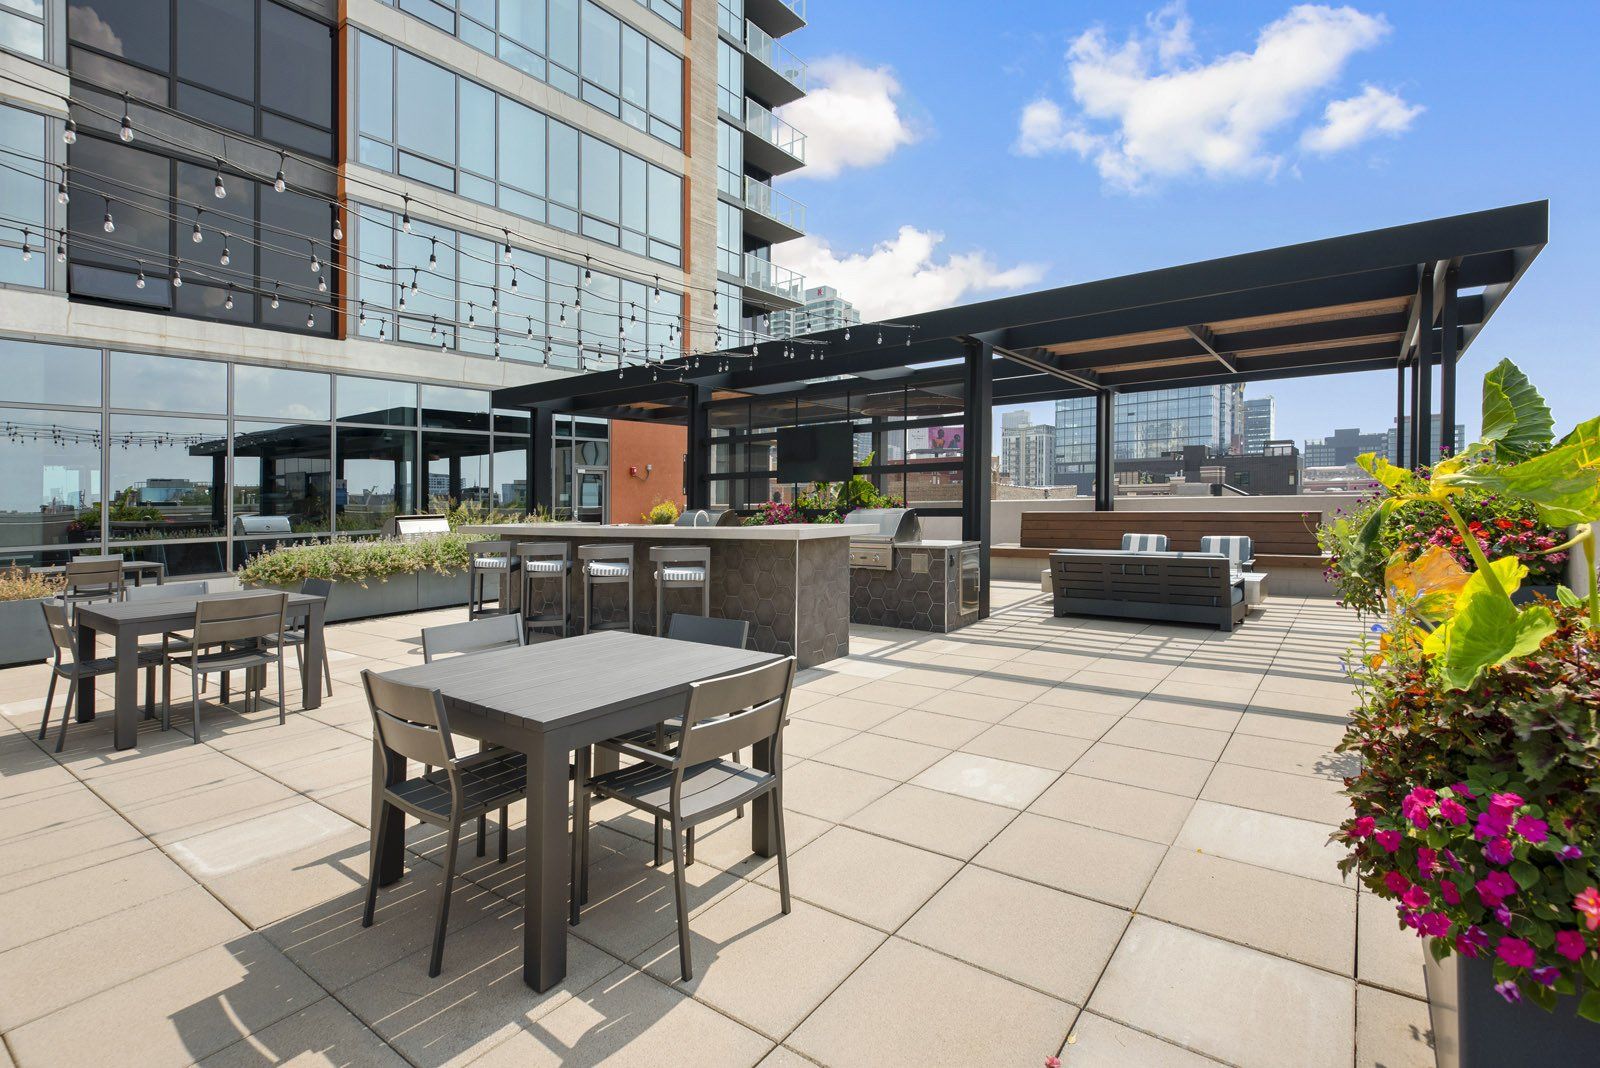 A patio with tables and chairs in front of a building at Reside on Green Street.